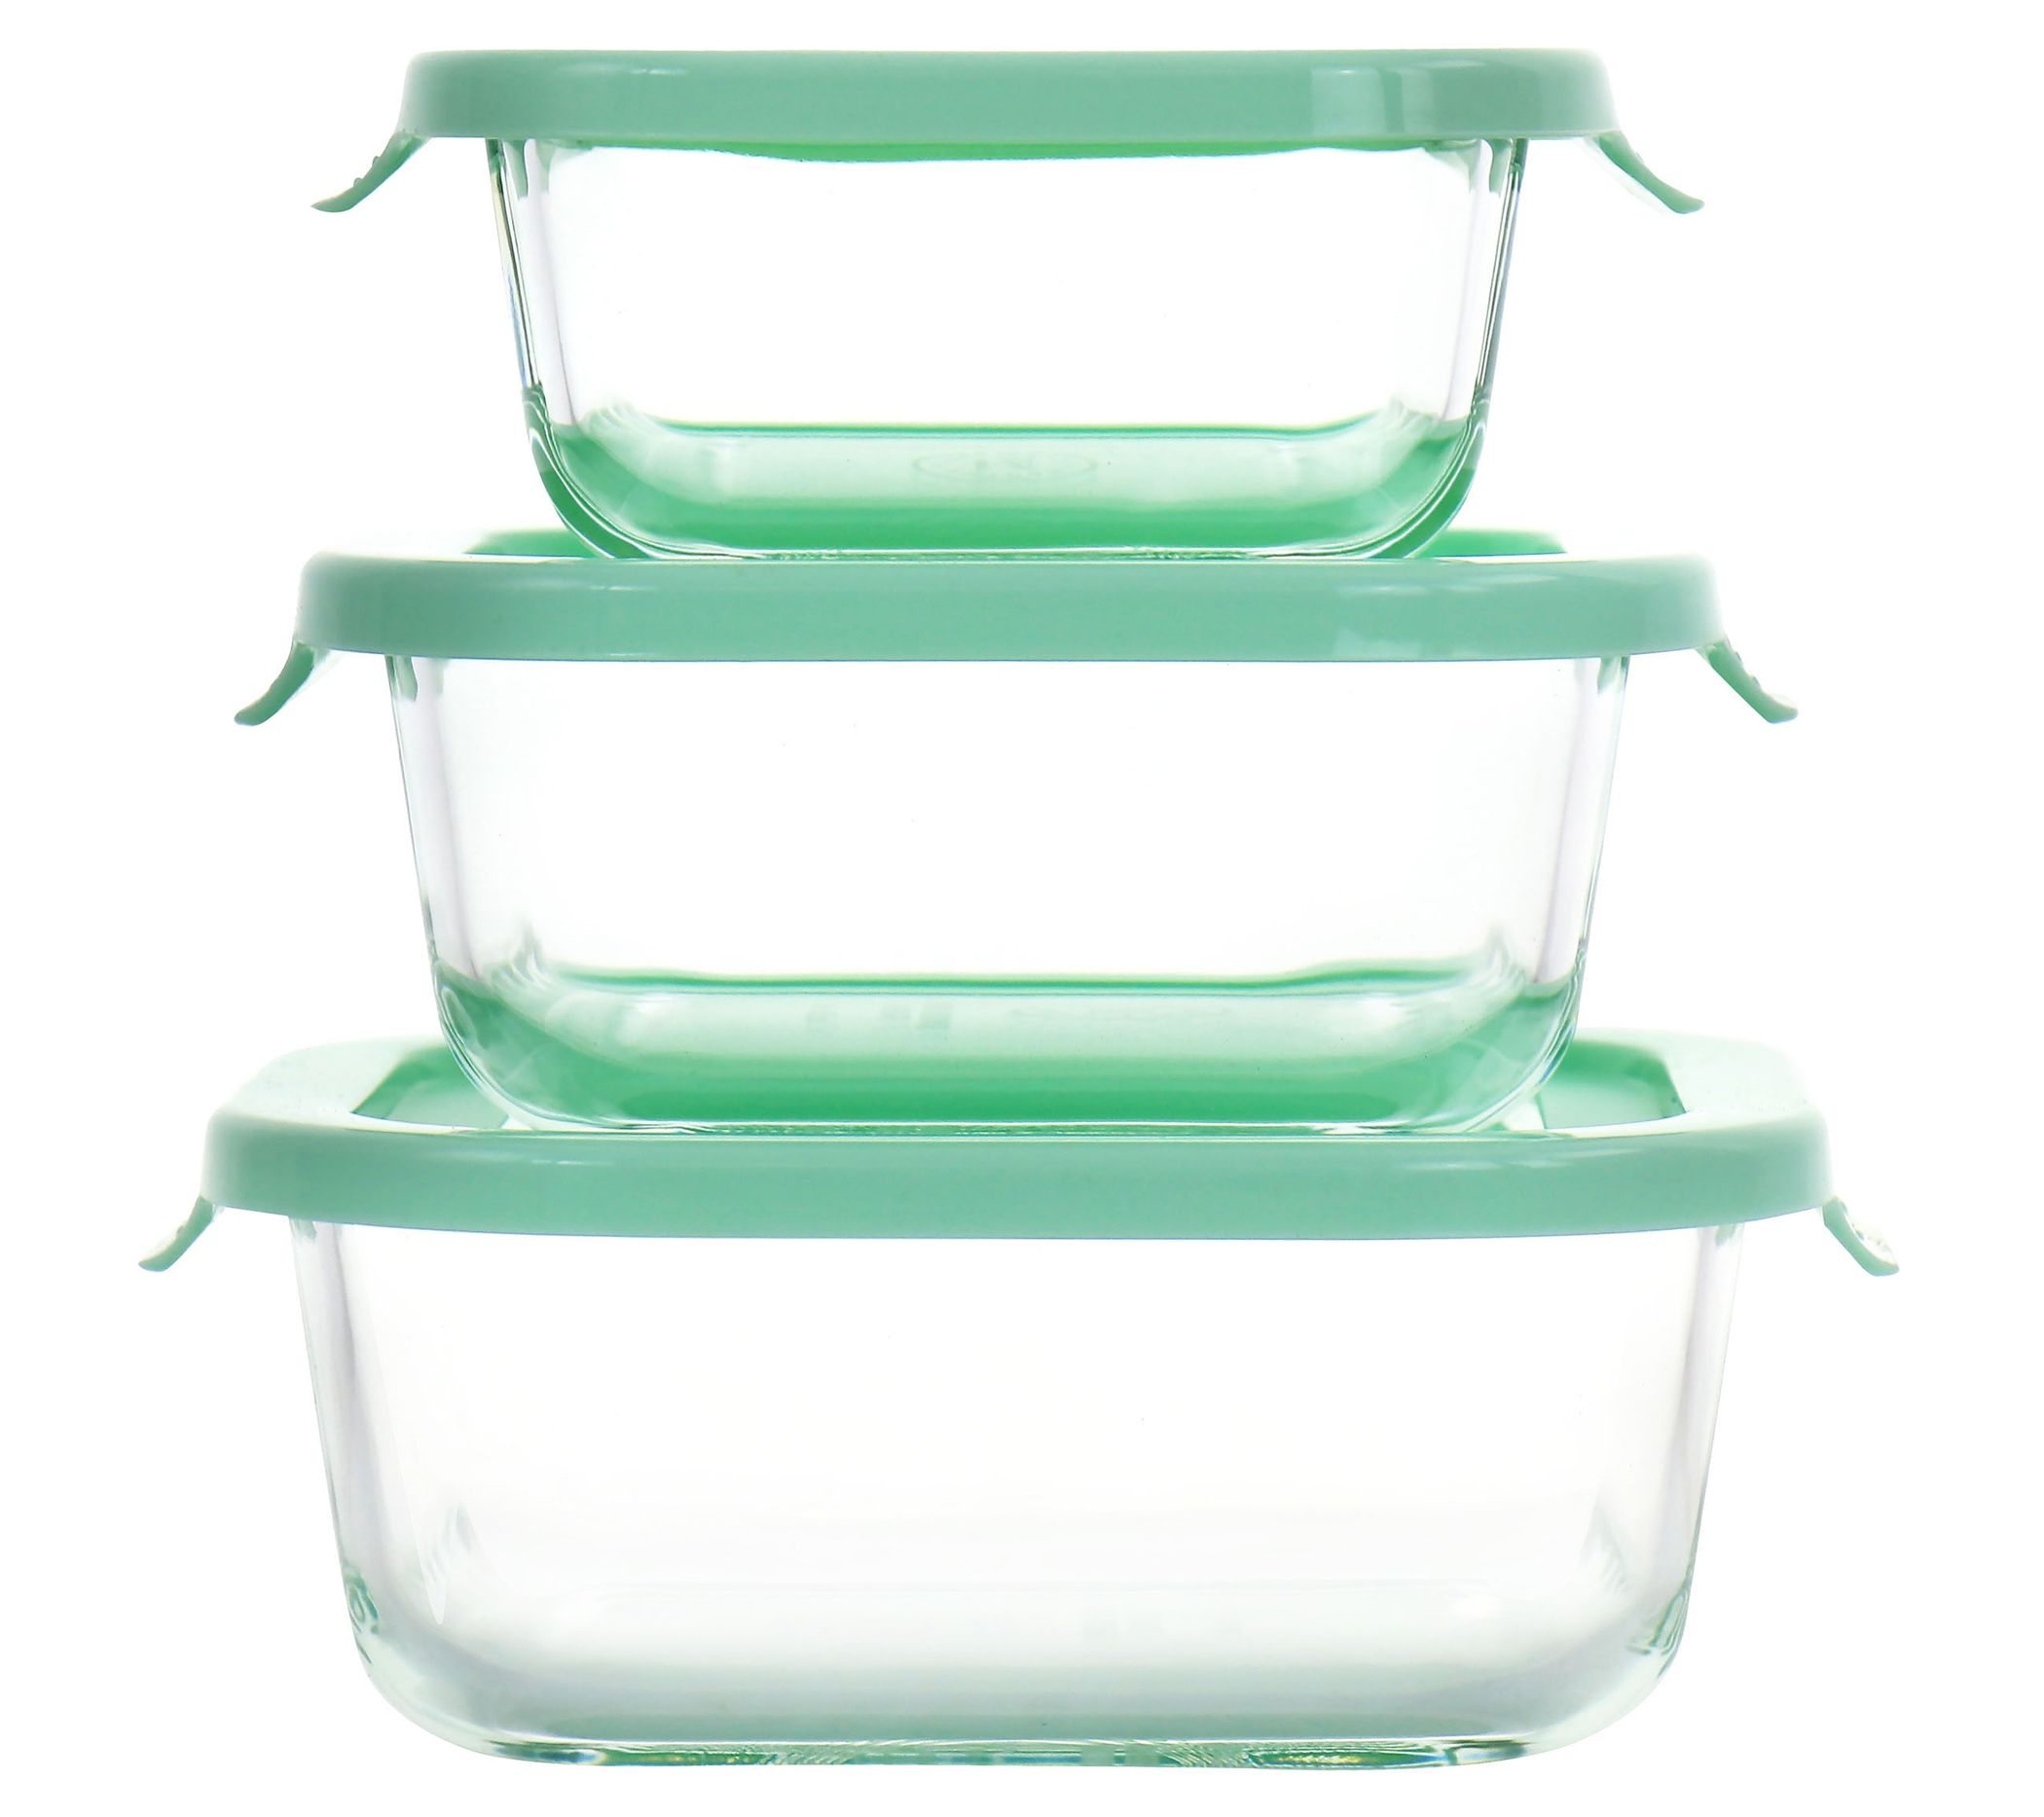 Oxo 16pc Smart Seal Glass Food Container Set Food Storage Review